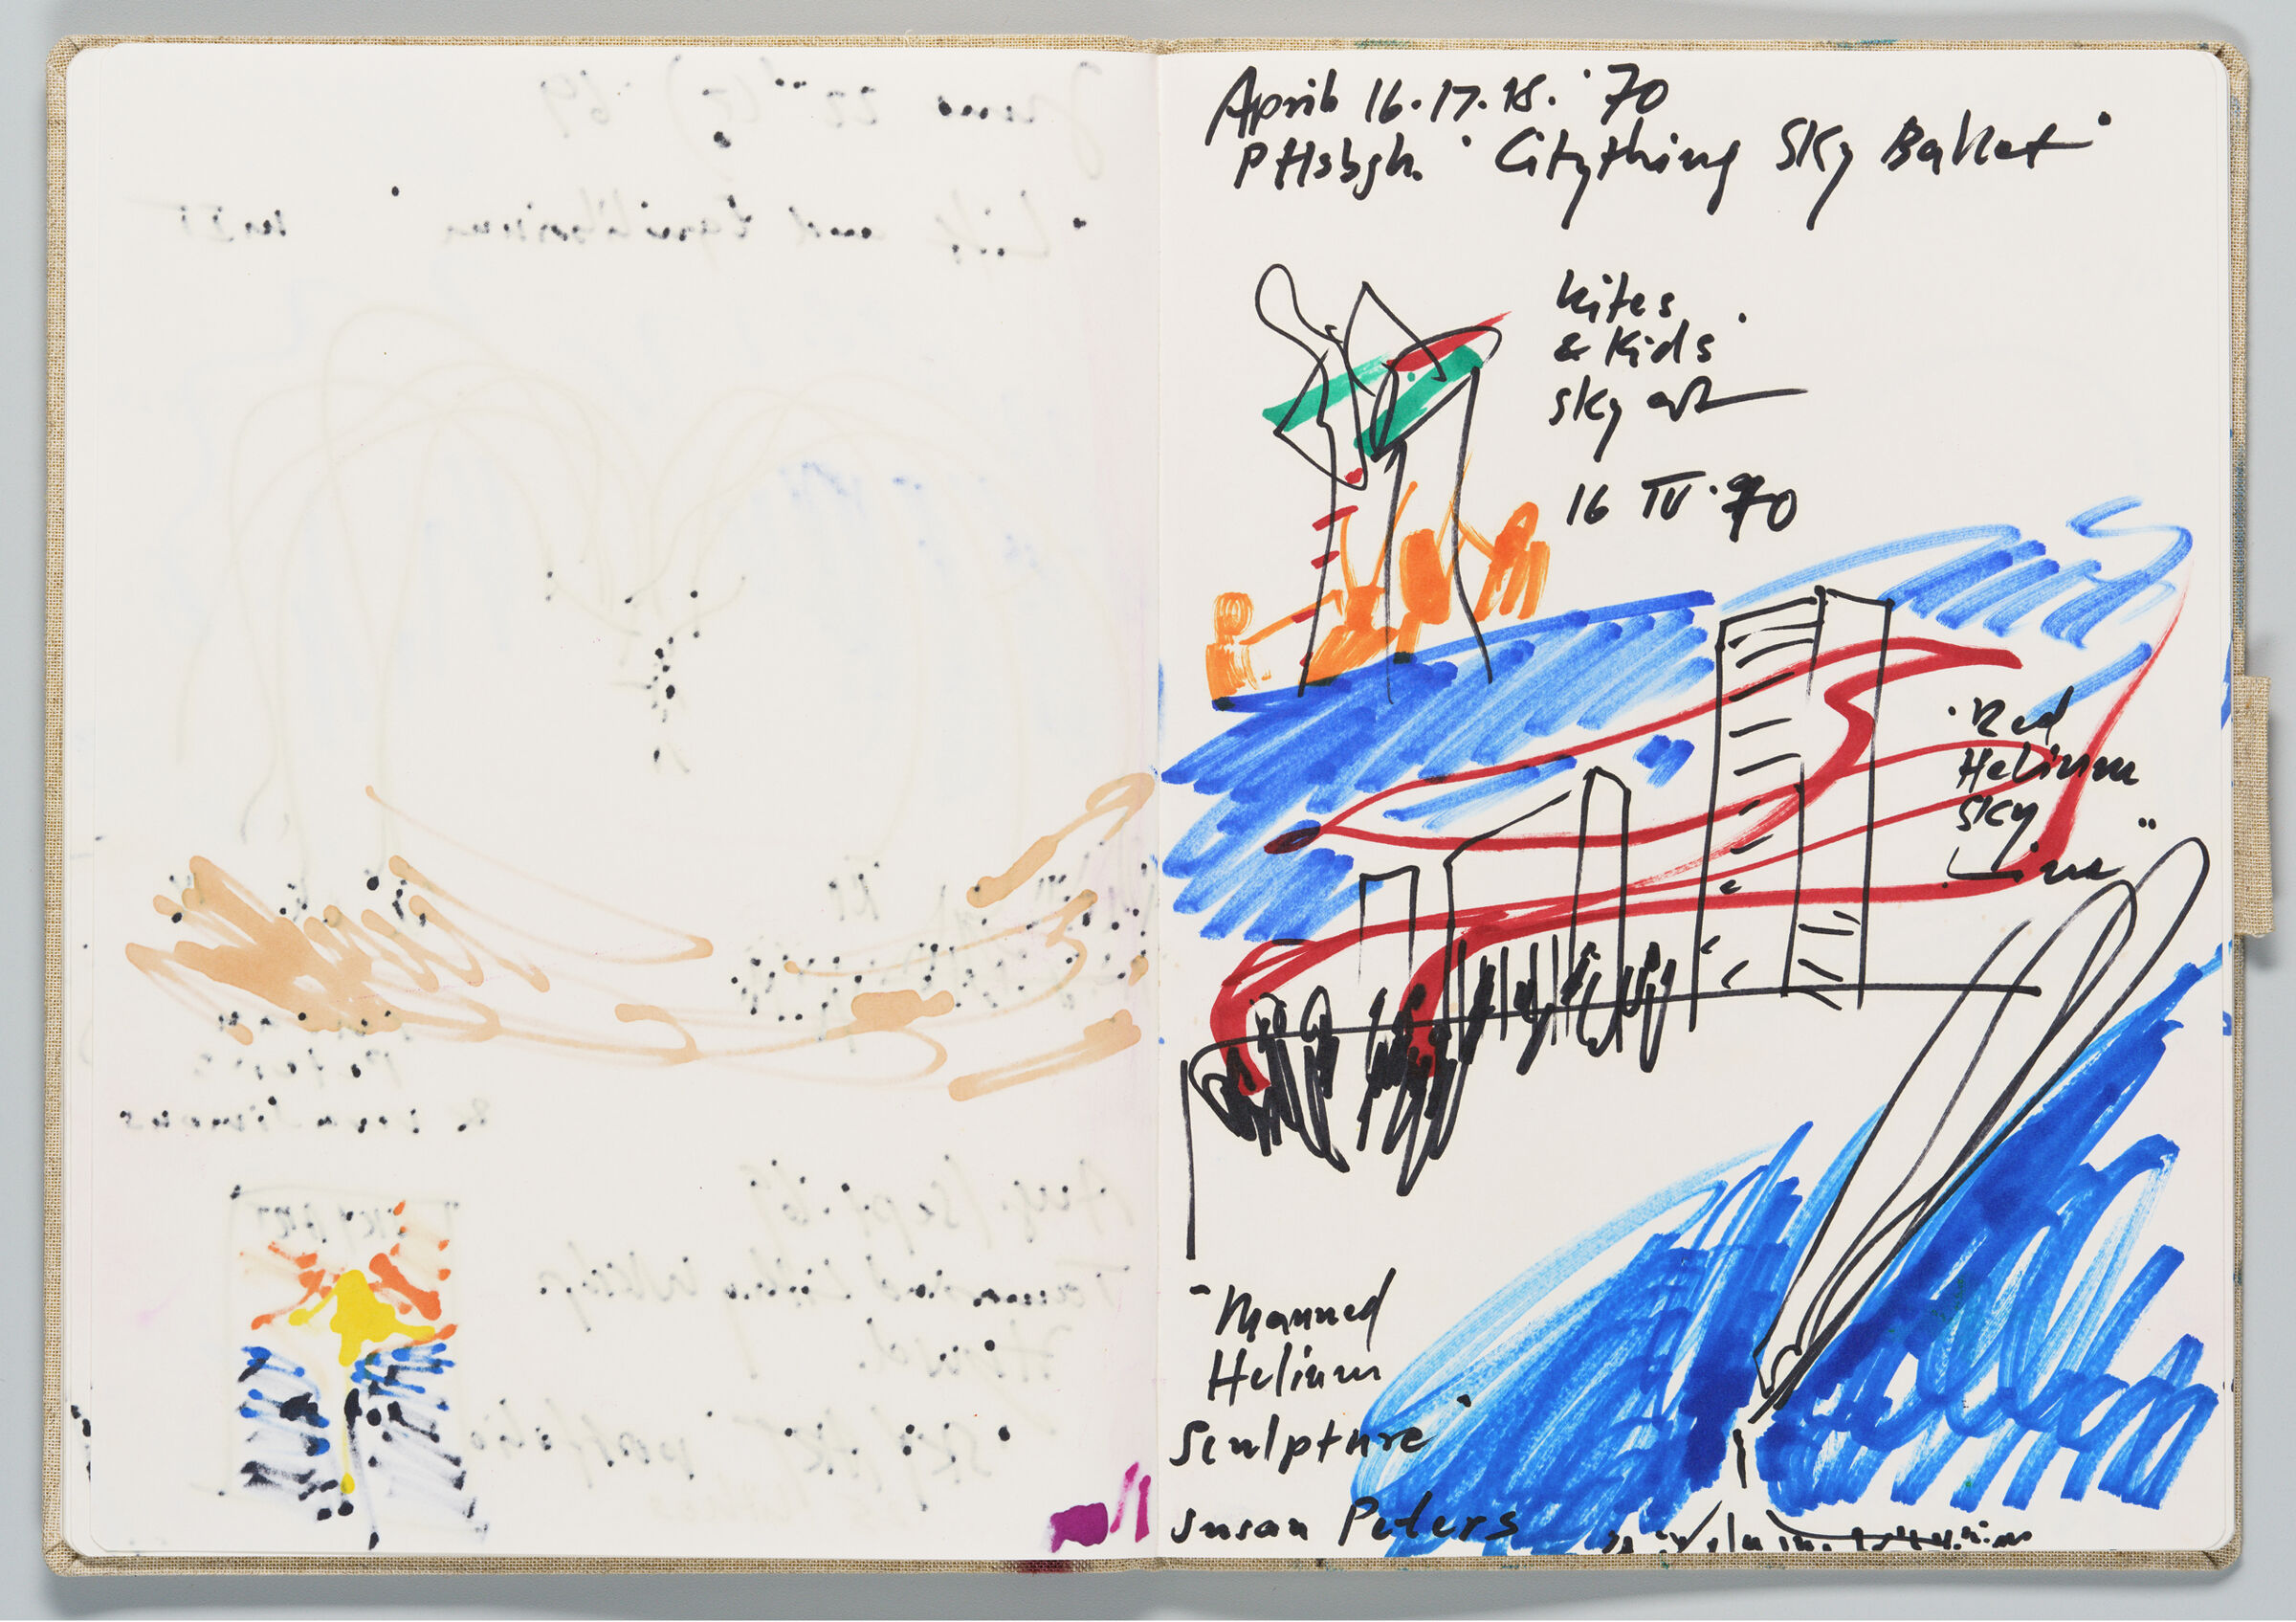 Untitled (Bleed-Through Of Previous Page, Left Page); Untitled (Sketches Of Past Sky Events, Right Page)